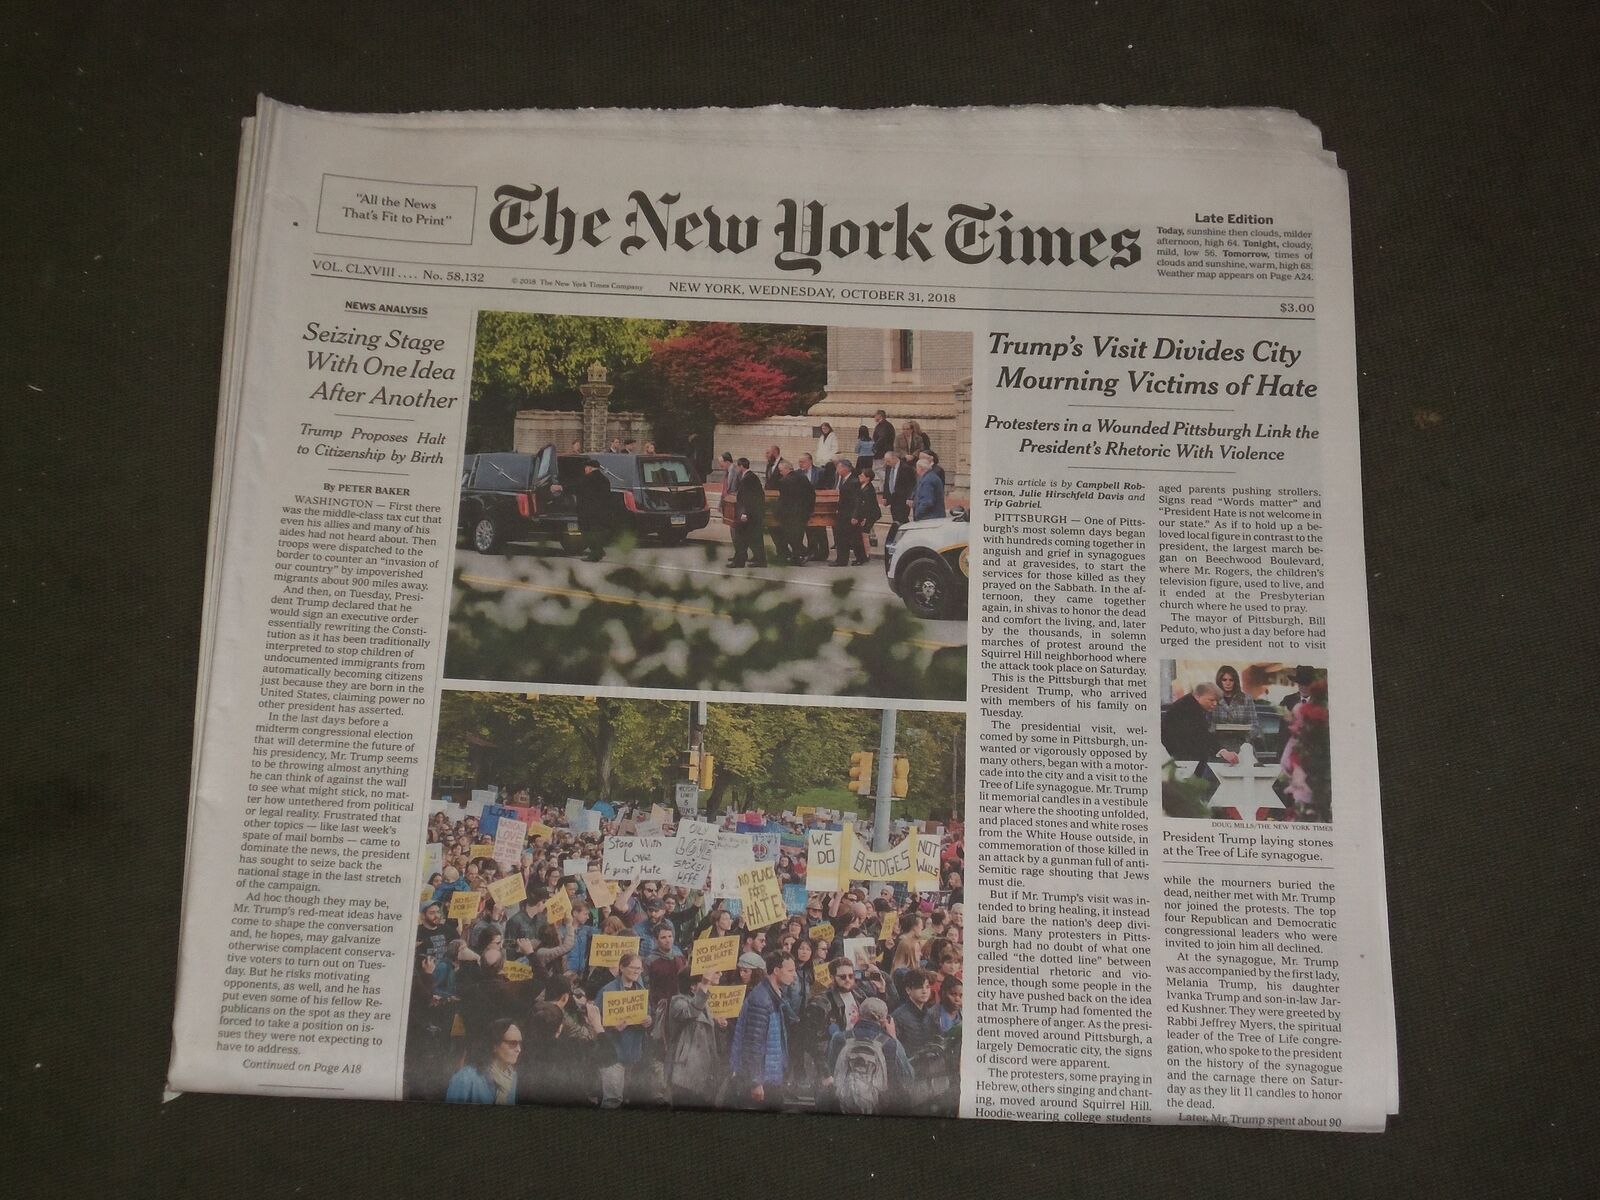 2018 OCTOBER 31 NEW YORK TIMES - TRUMP'S PITTSBURGH VISIT DIVIDES MOURNING CITY